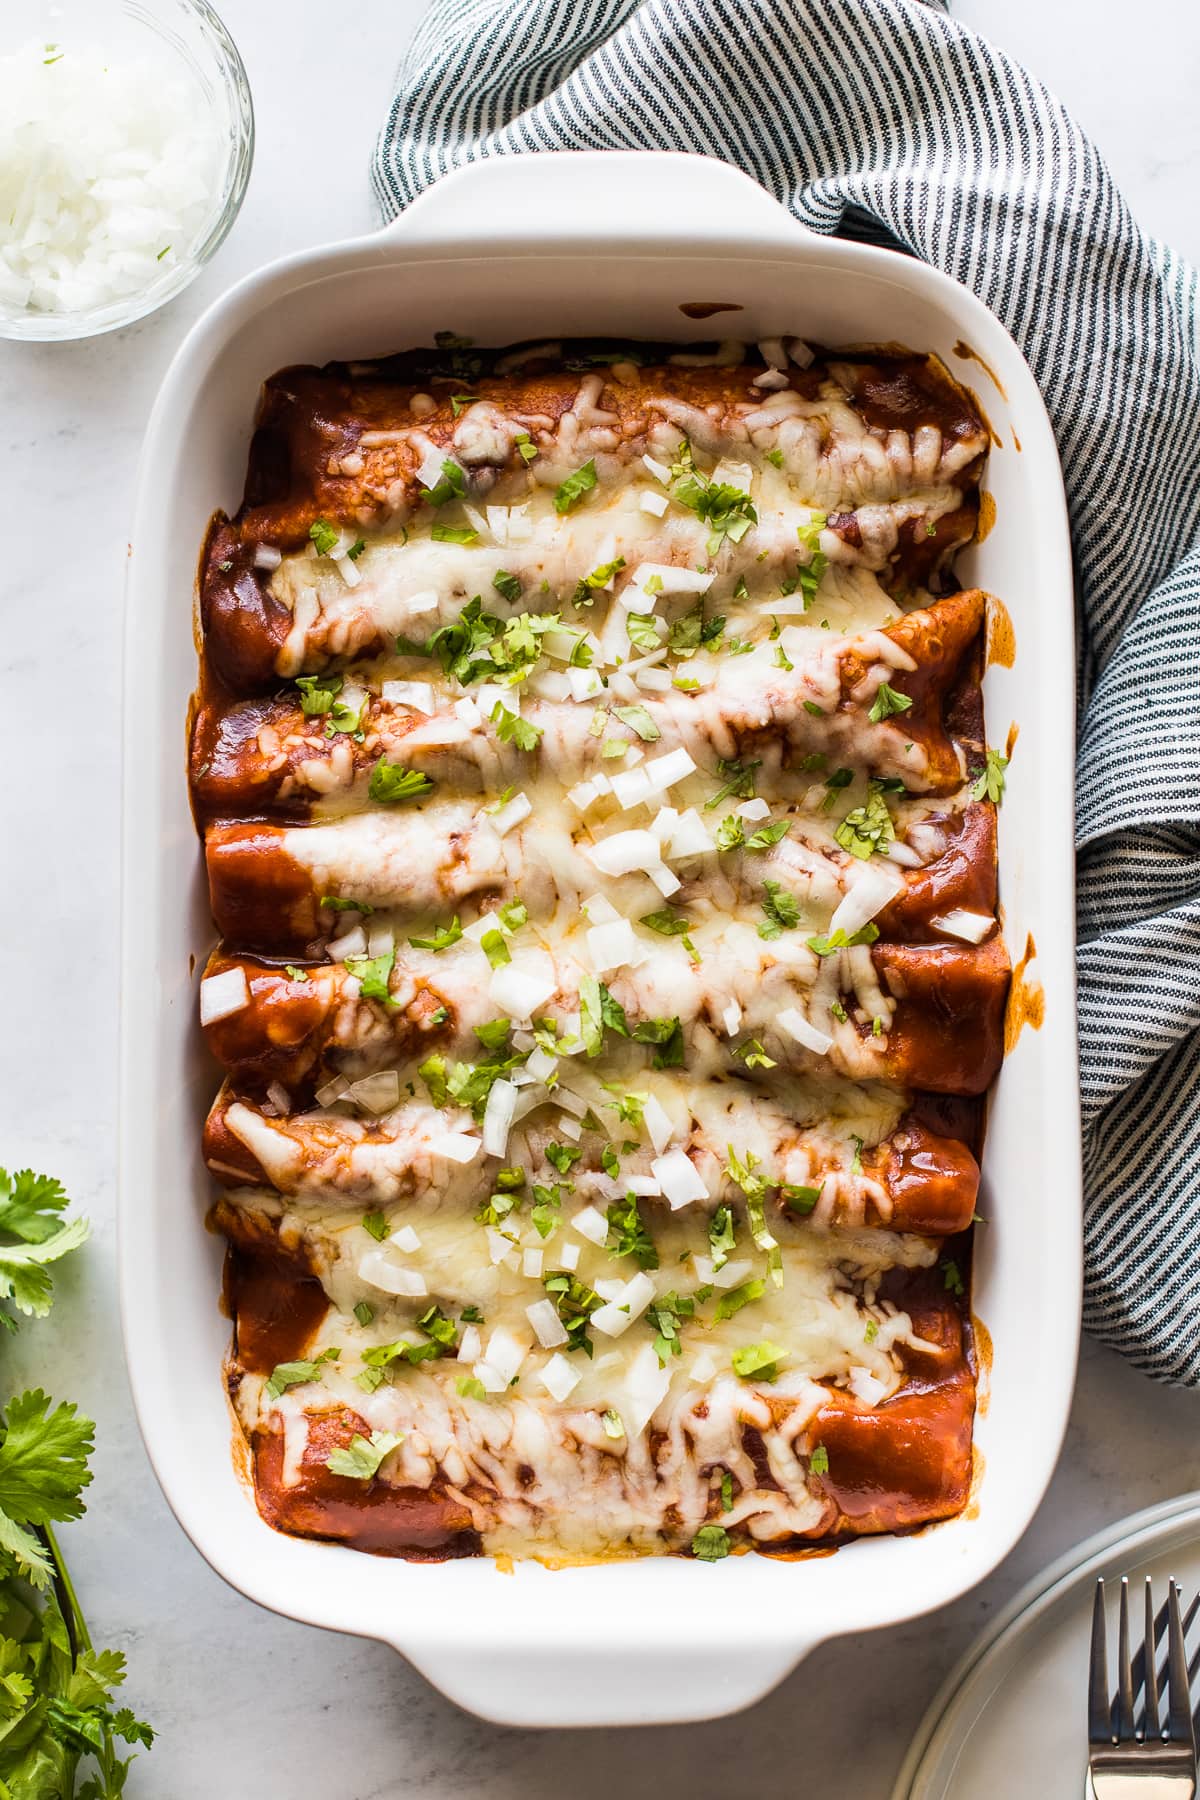 Turkey enchiladas in a baking dish topped with cilantro and onions.